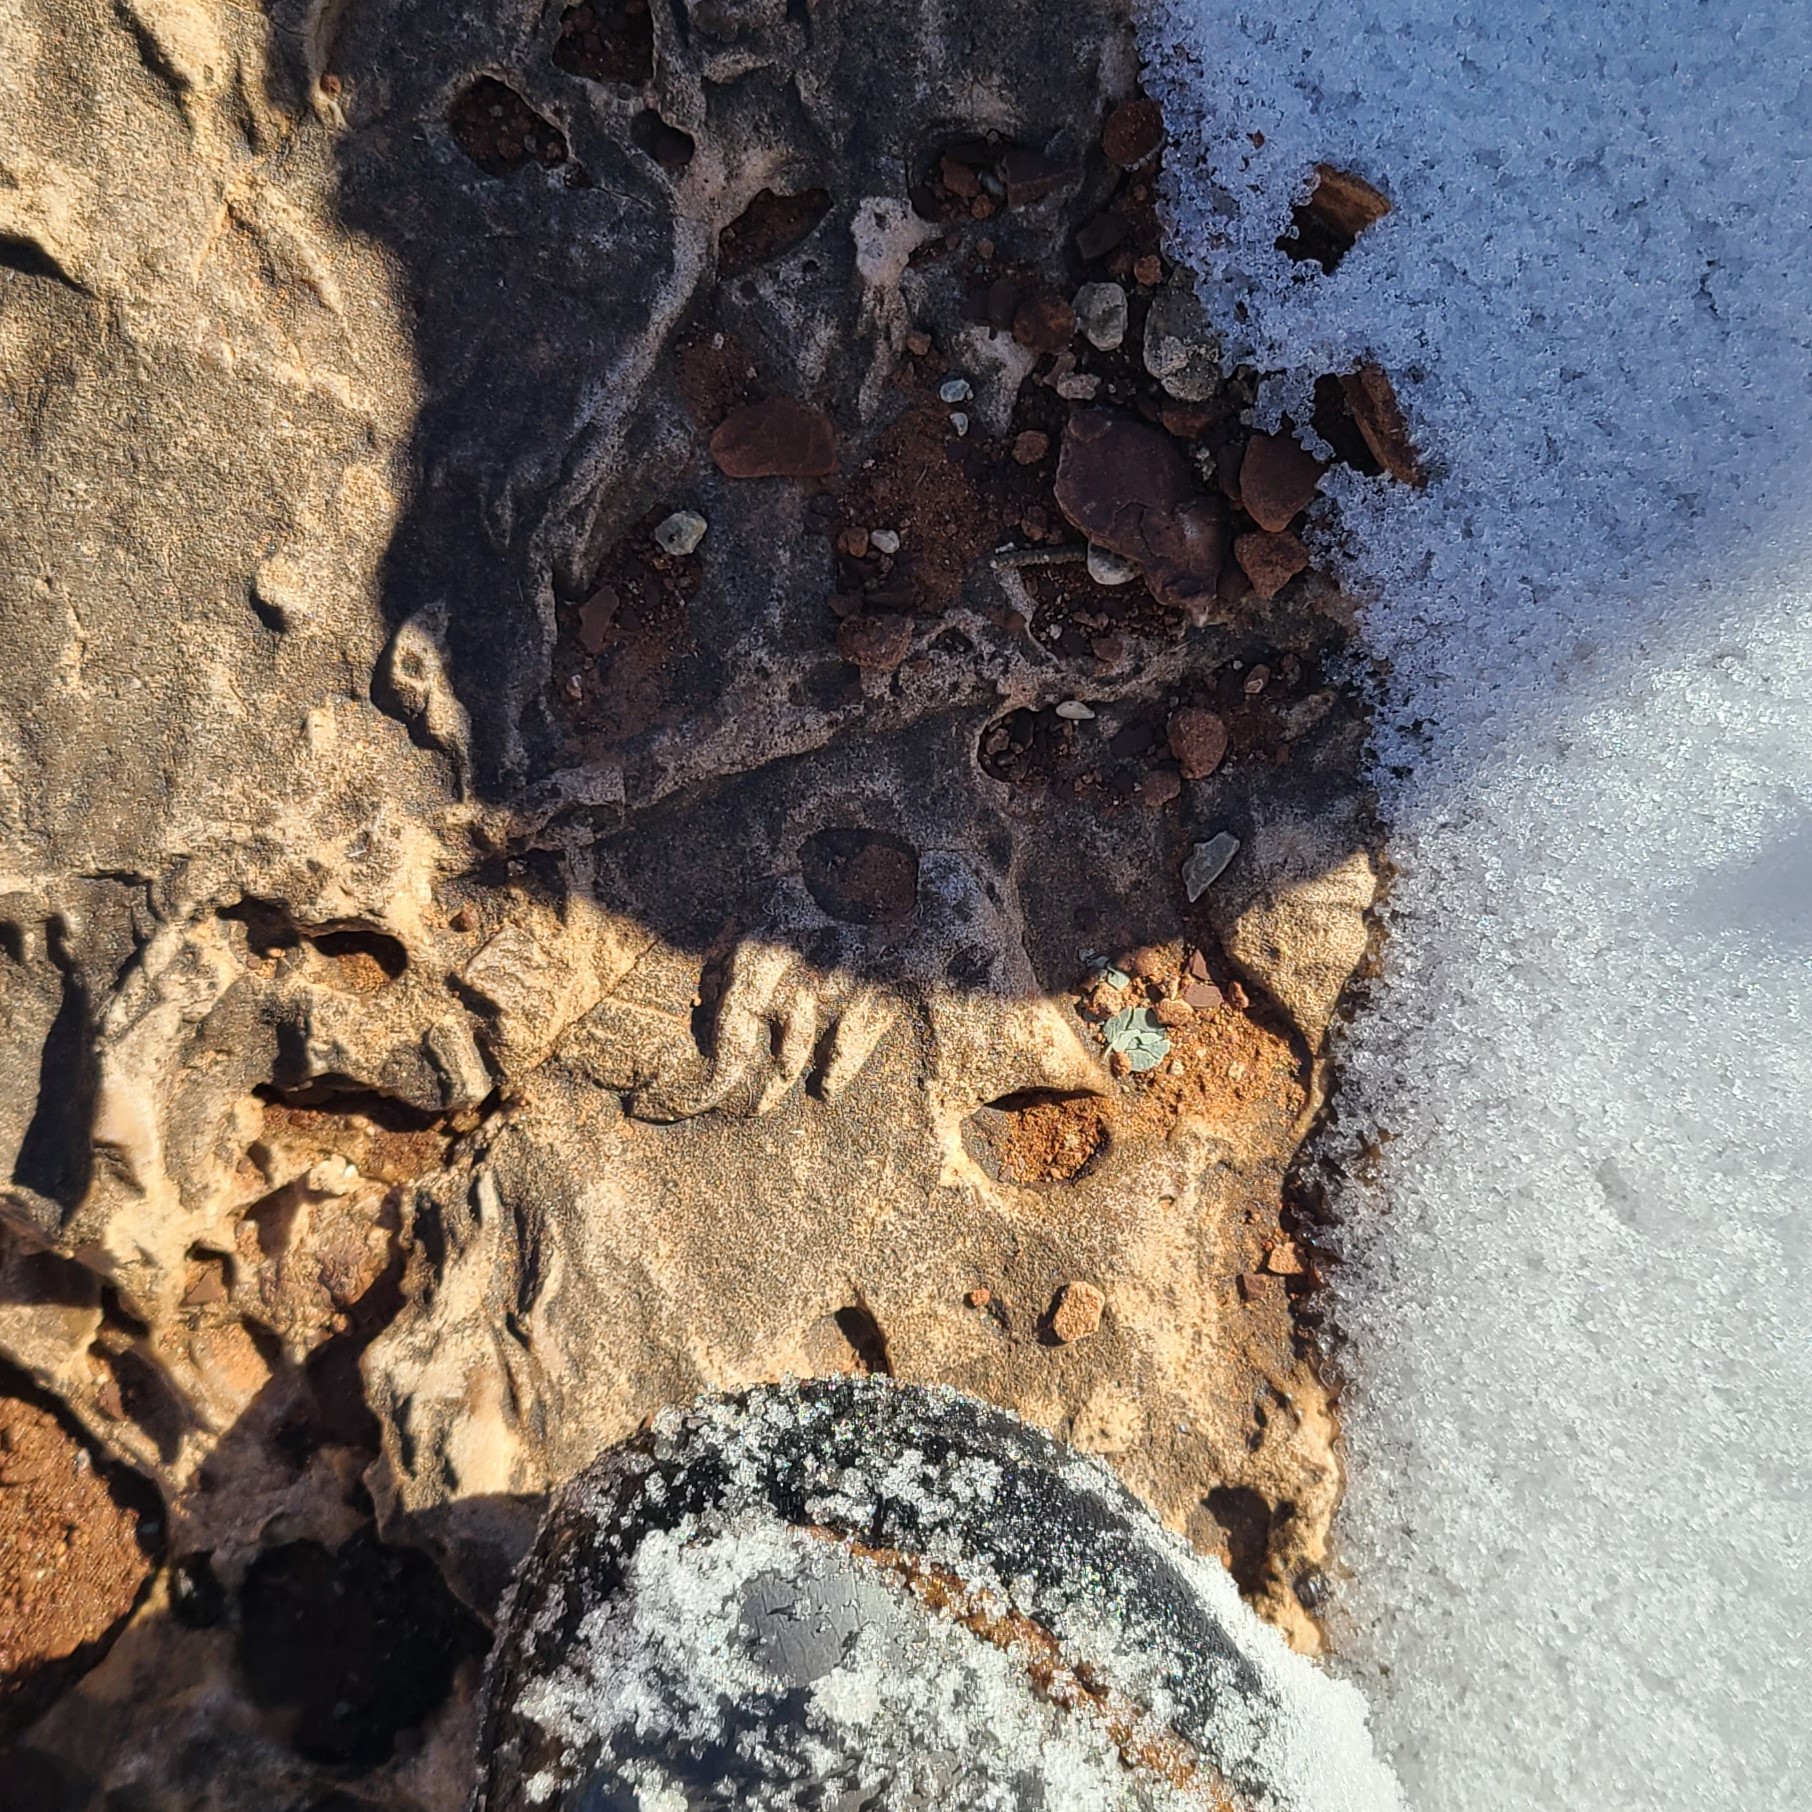 A three-toed Triassic footprint, snow, and a paleontologist's boot for scale.